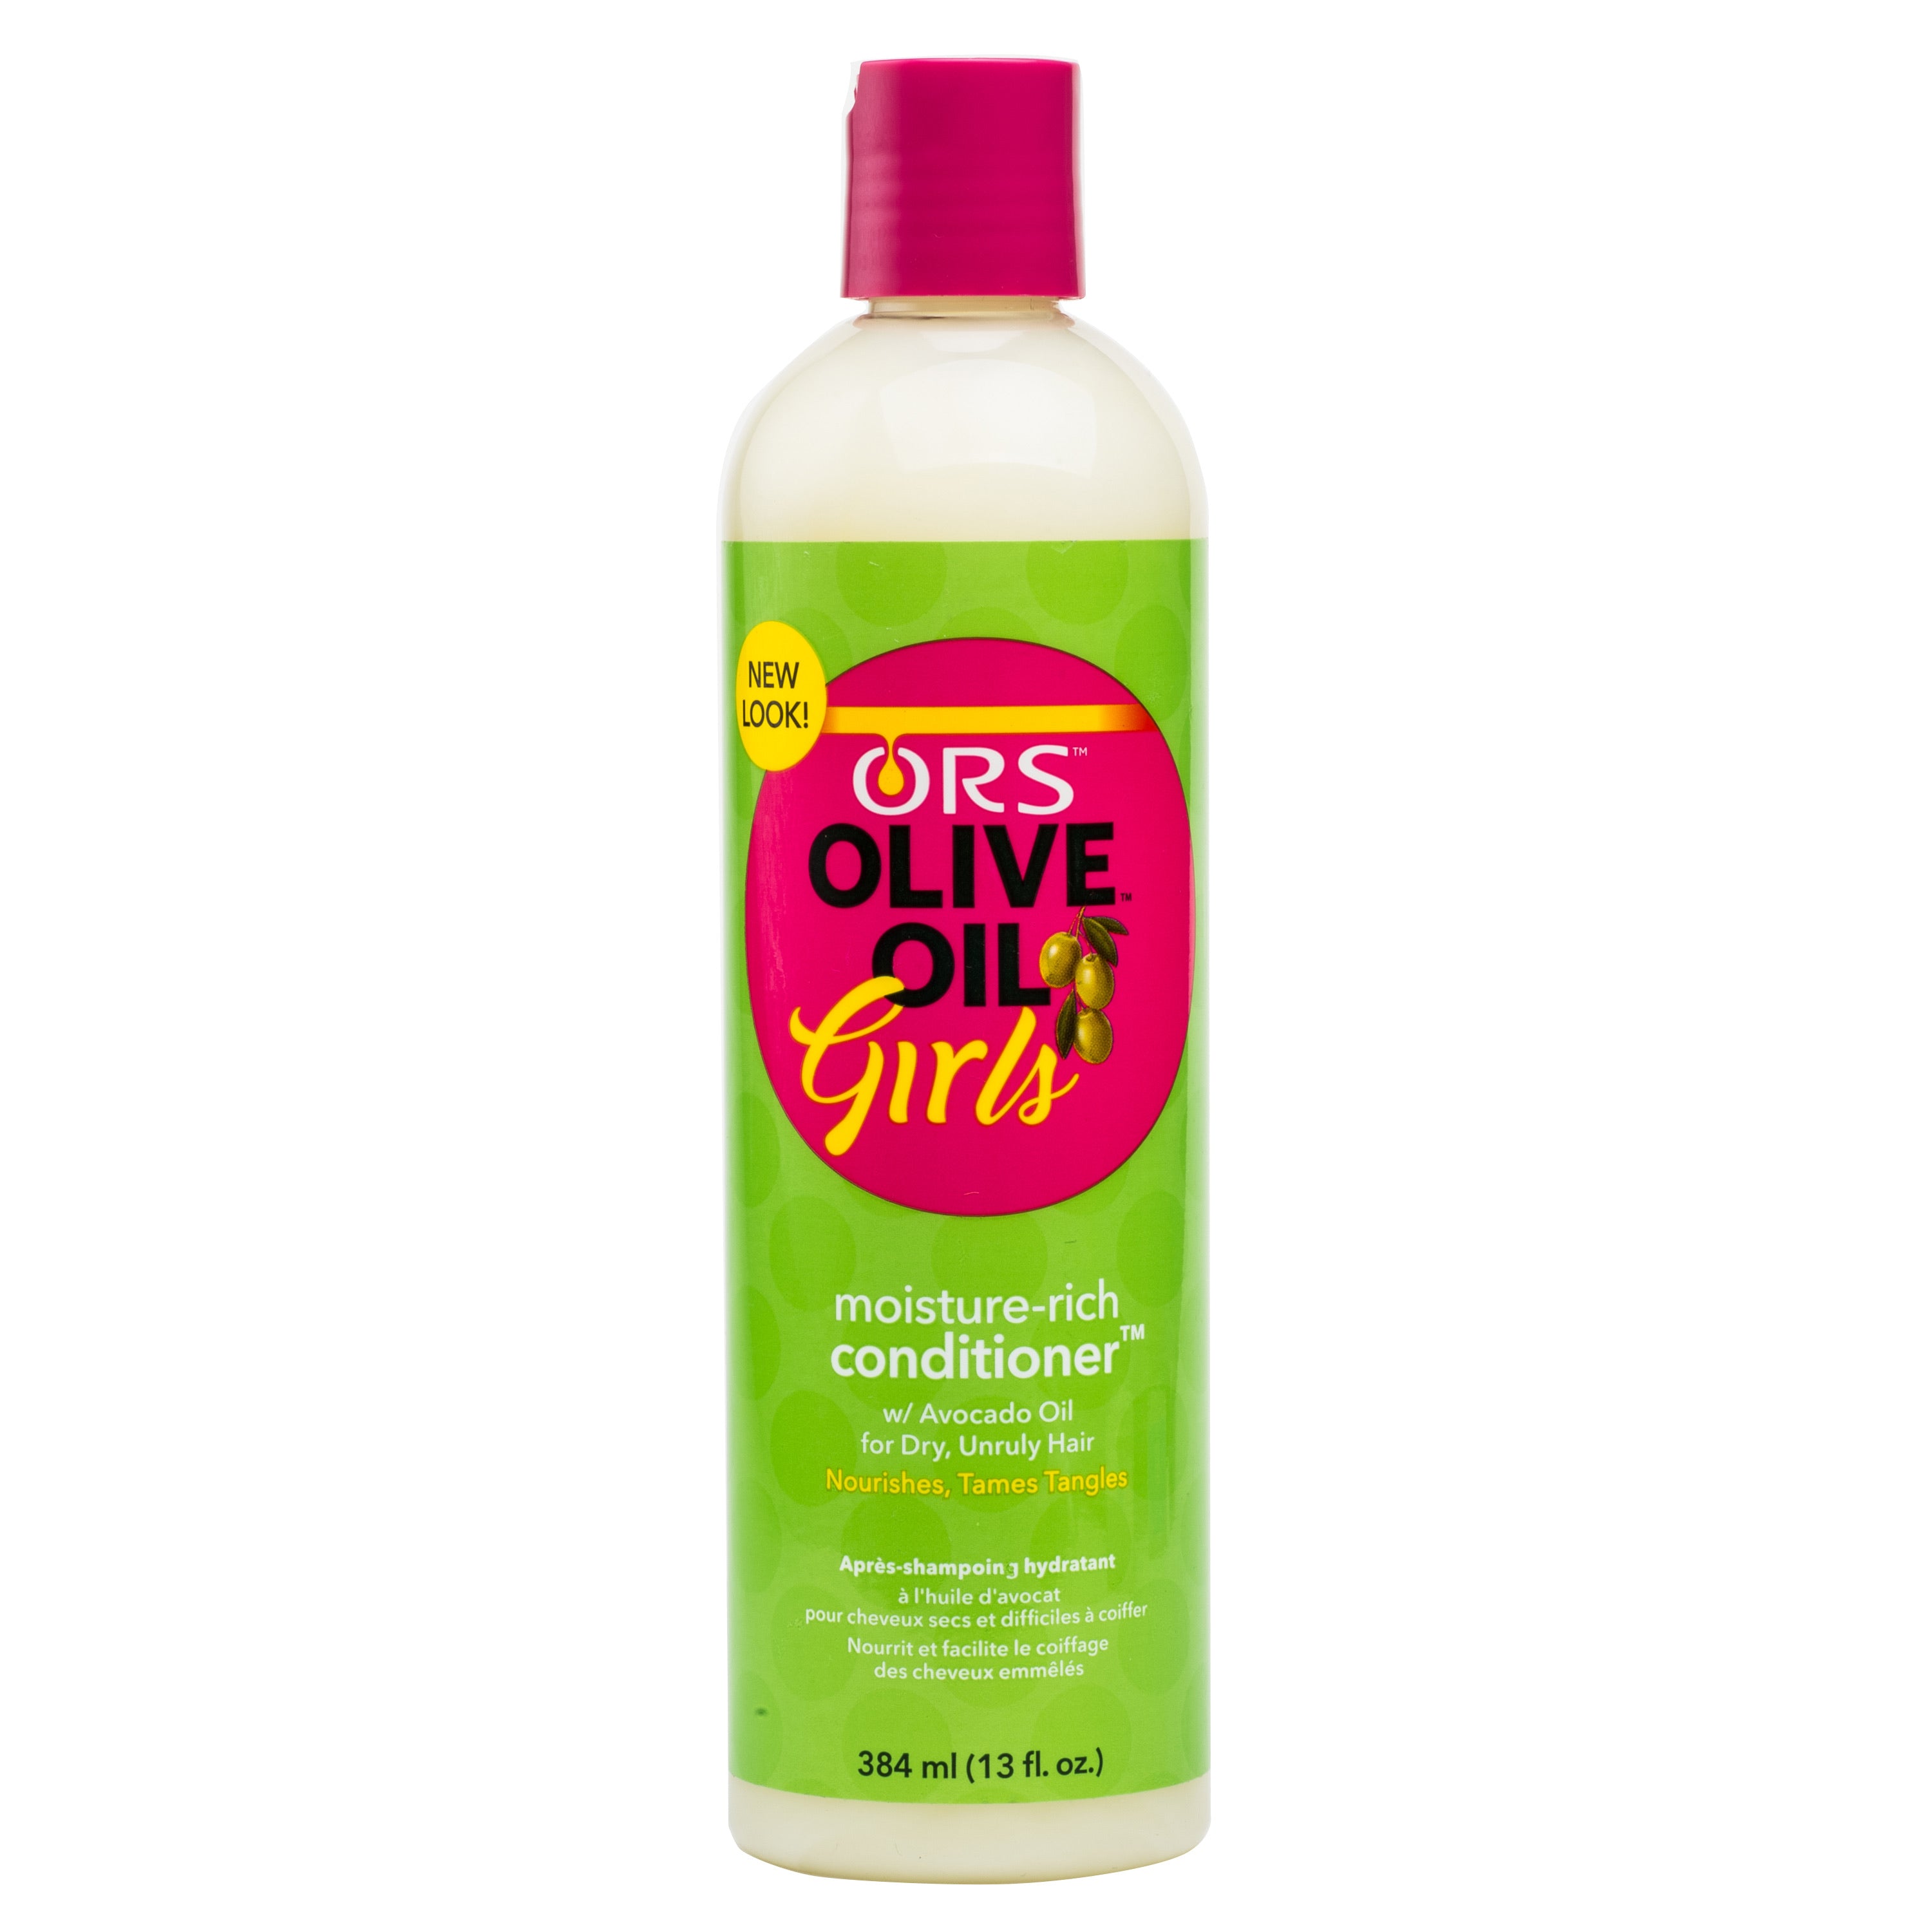 Ors olive oil girls moisture rich conditioner 384ml